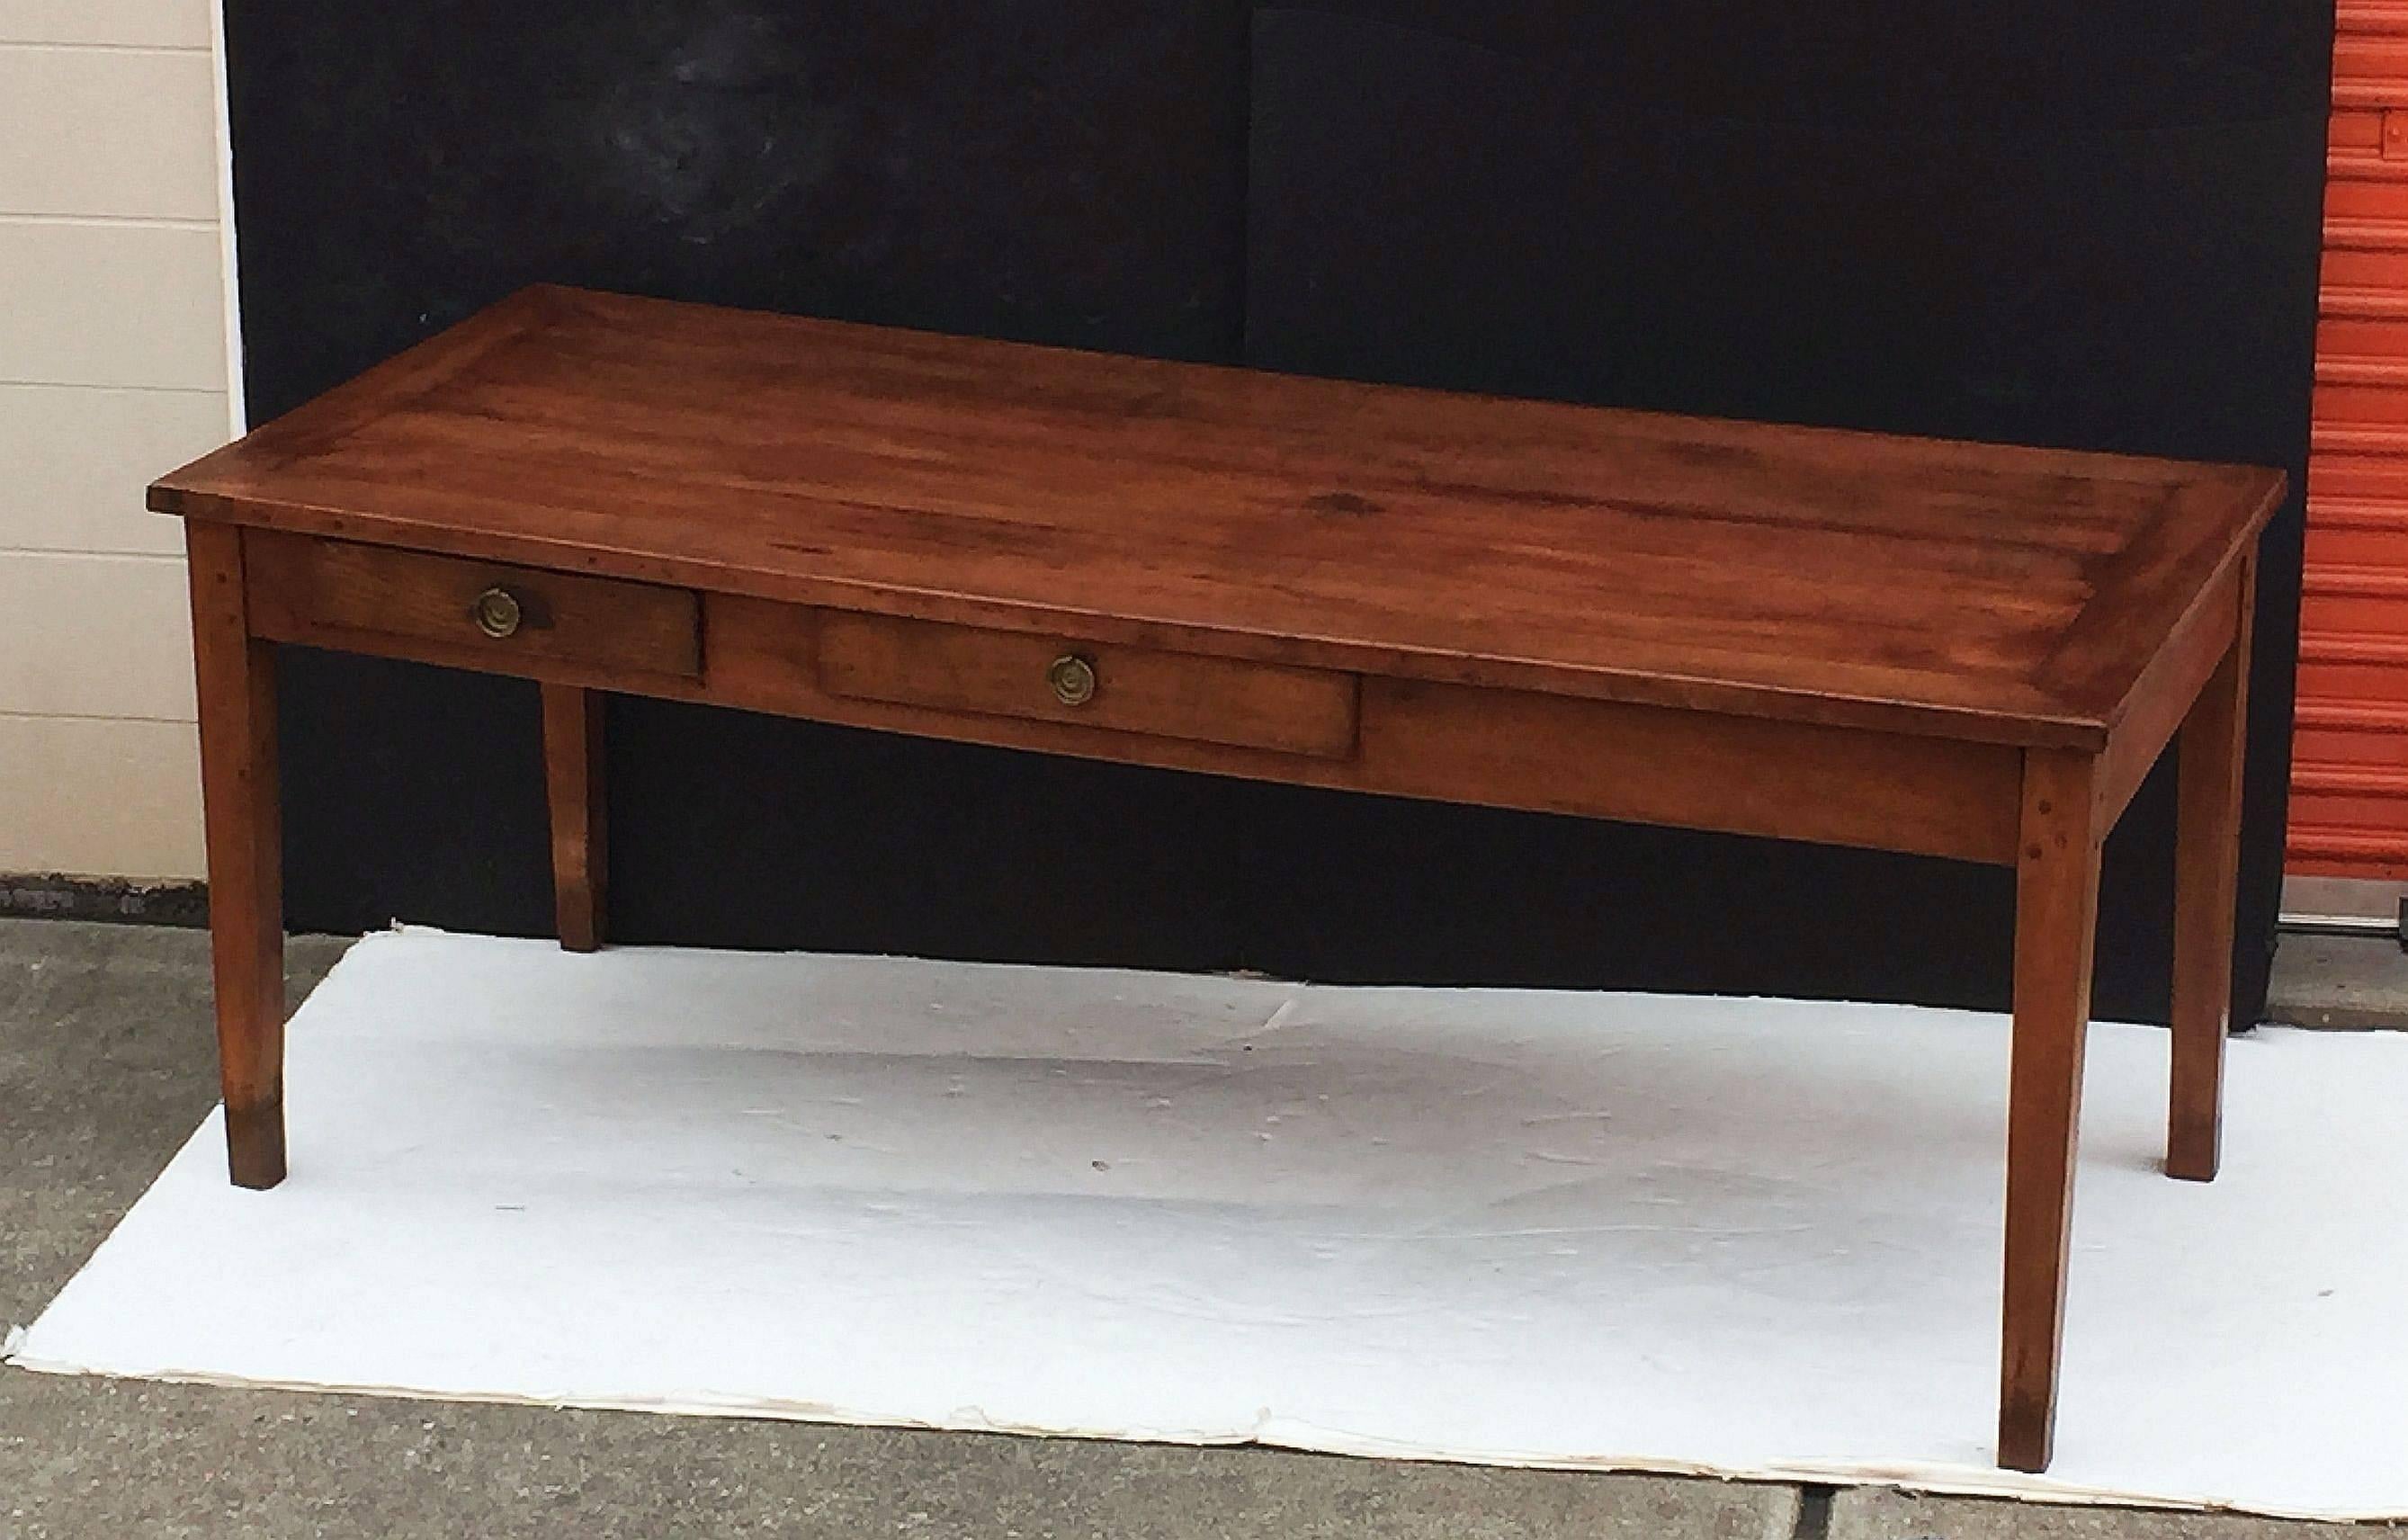 A handsome French farm table of cherry featuring a paneled rectangular top on a pegged frame with drawers on opposing sides (three drawers total, all with brass hardware), standing on square tapering legs. 

Makes a fine dining or breakfast table.